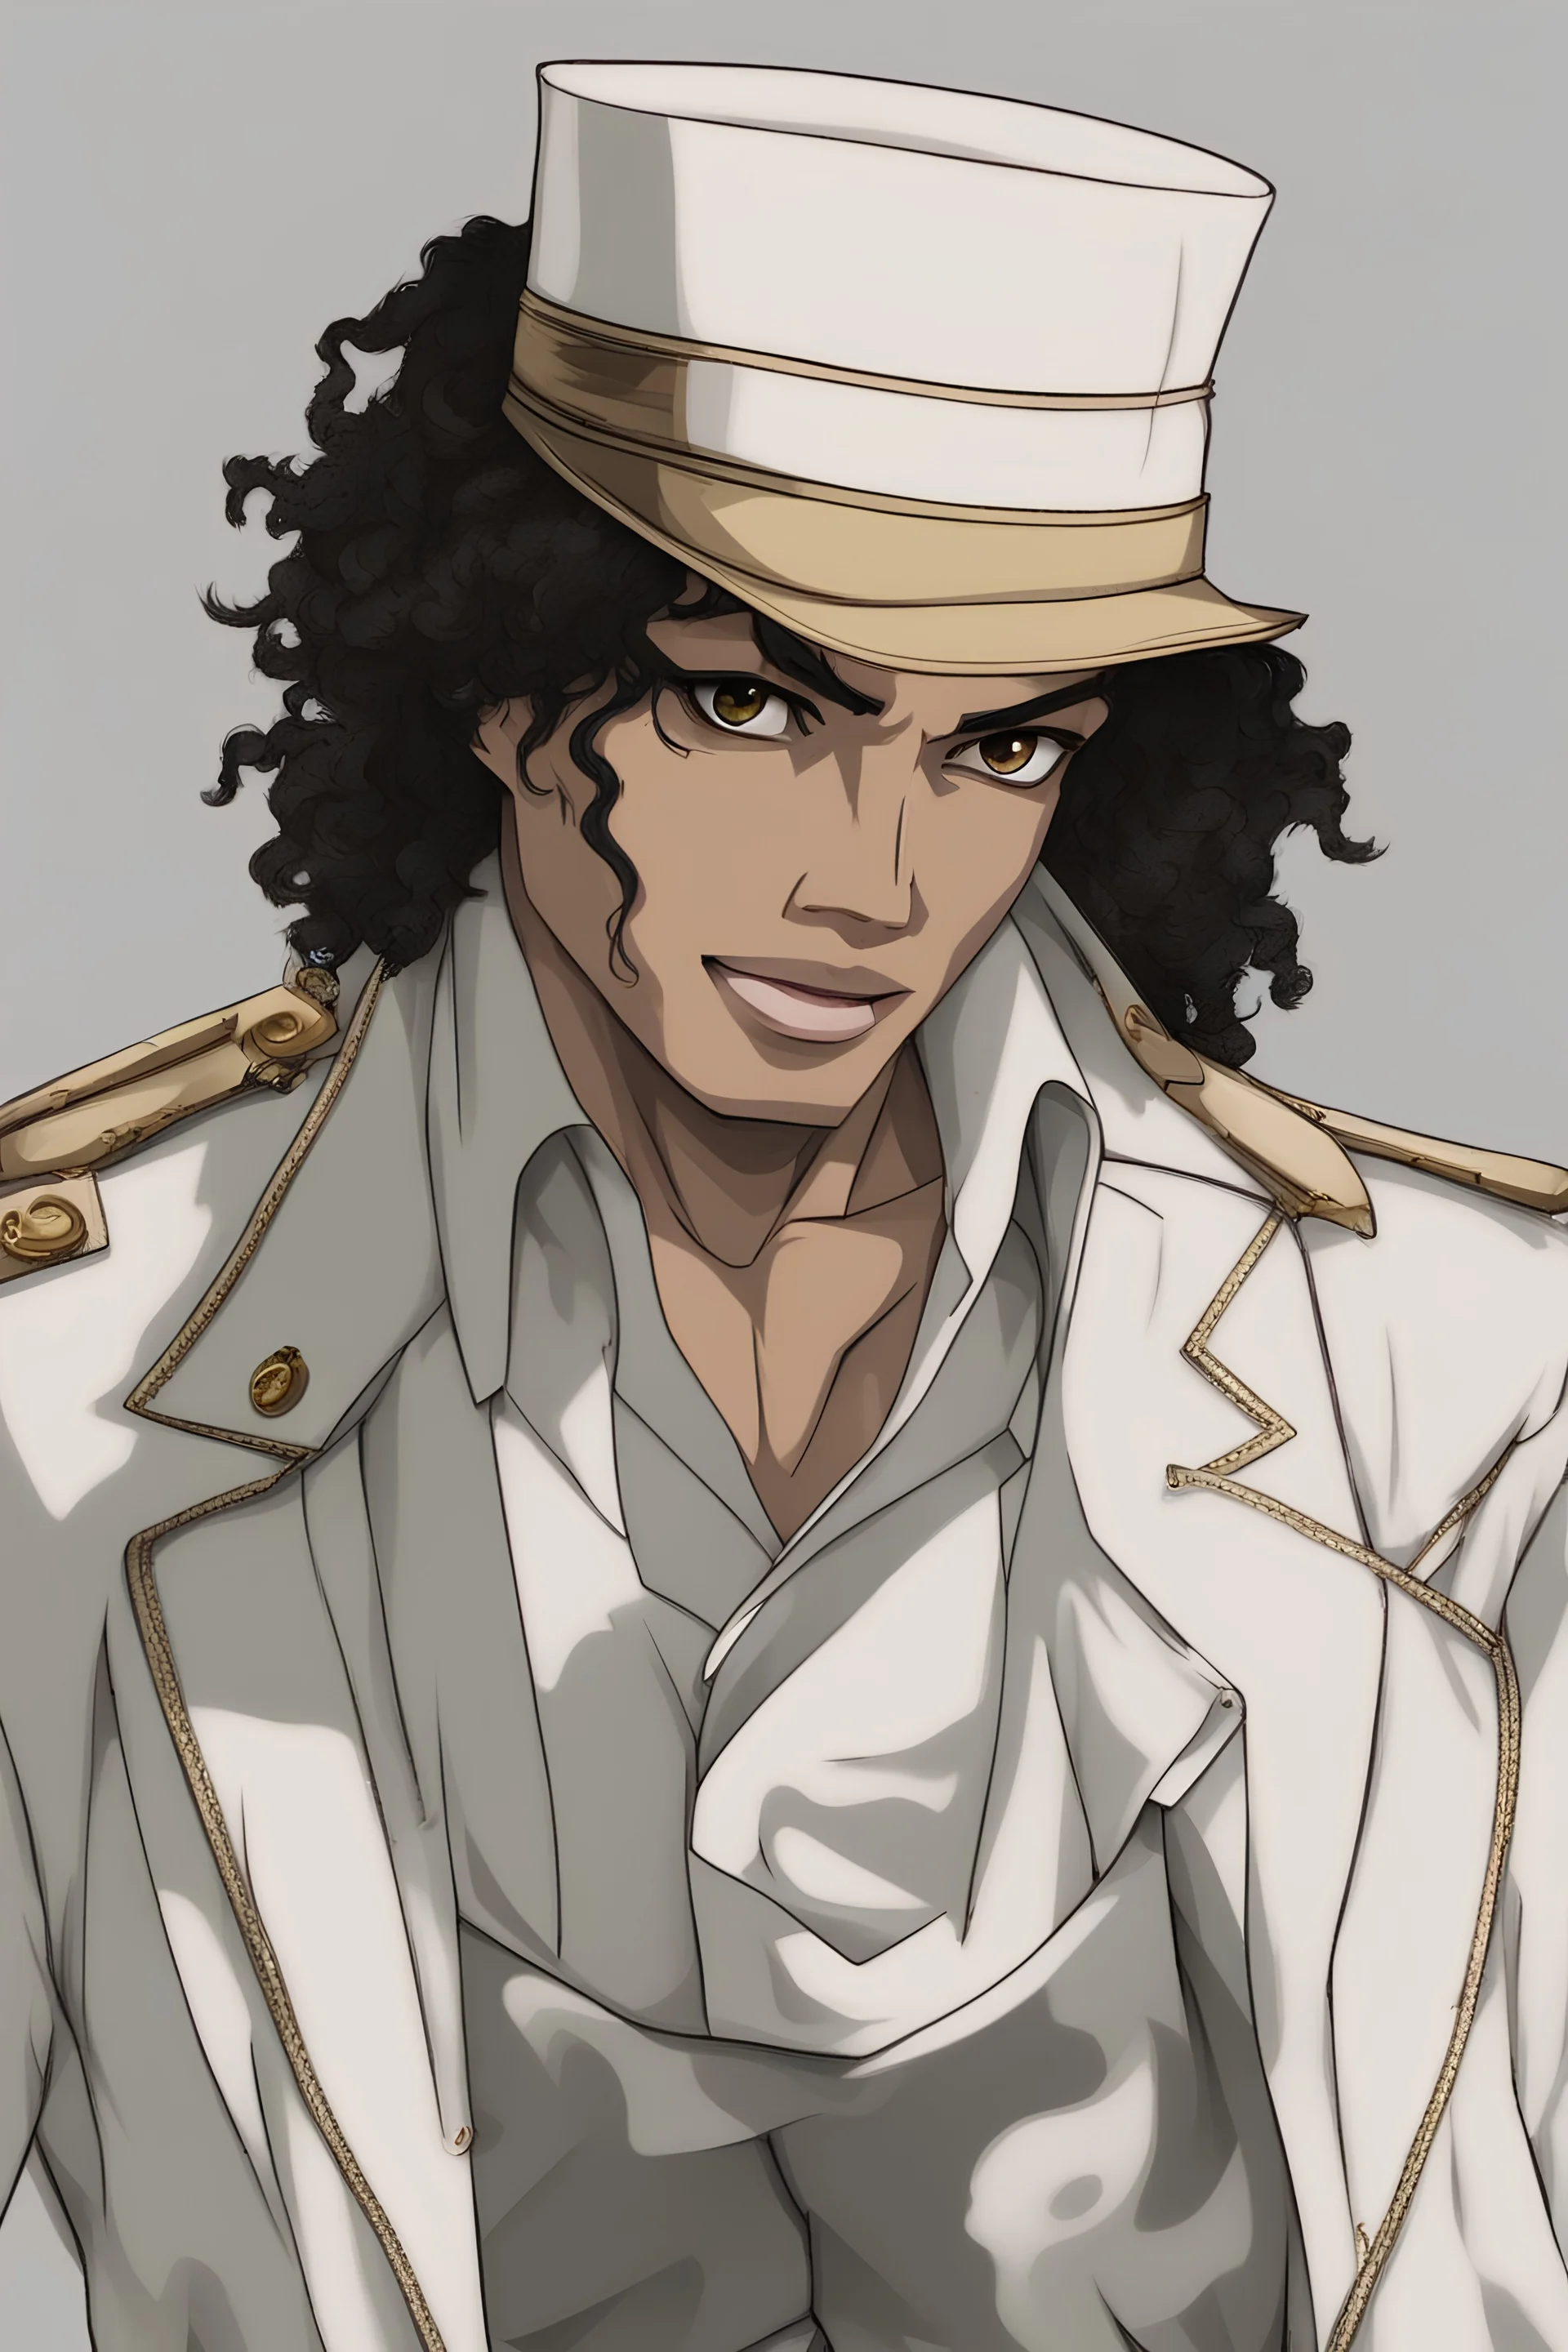 michael jackson anime version, with his white hat, his wavy hair in a pony tale, with a tuft of curls over his face on both sides